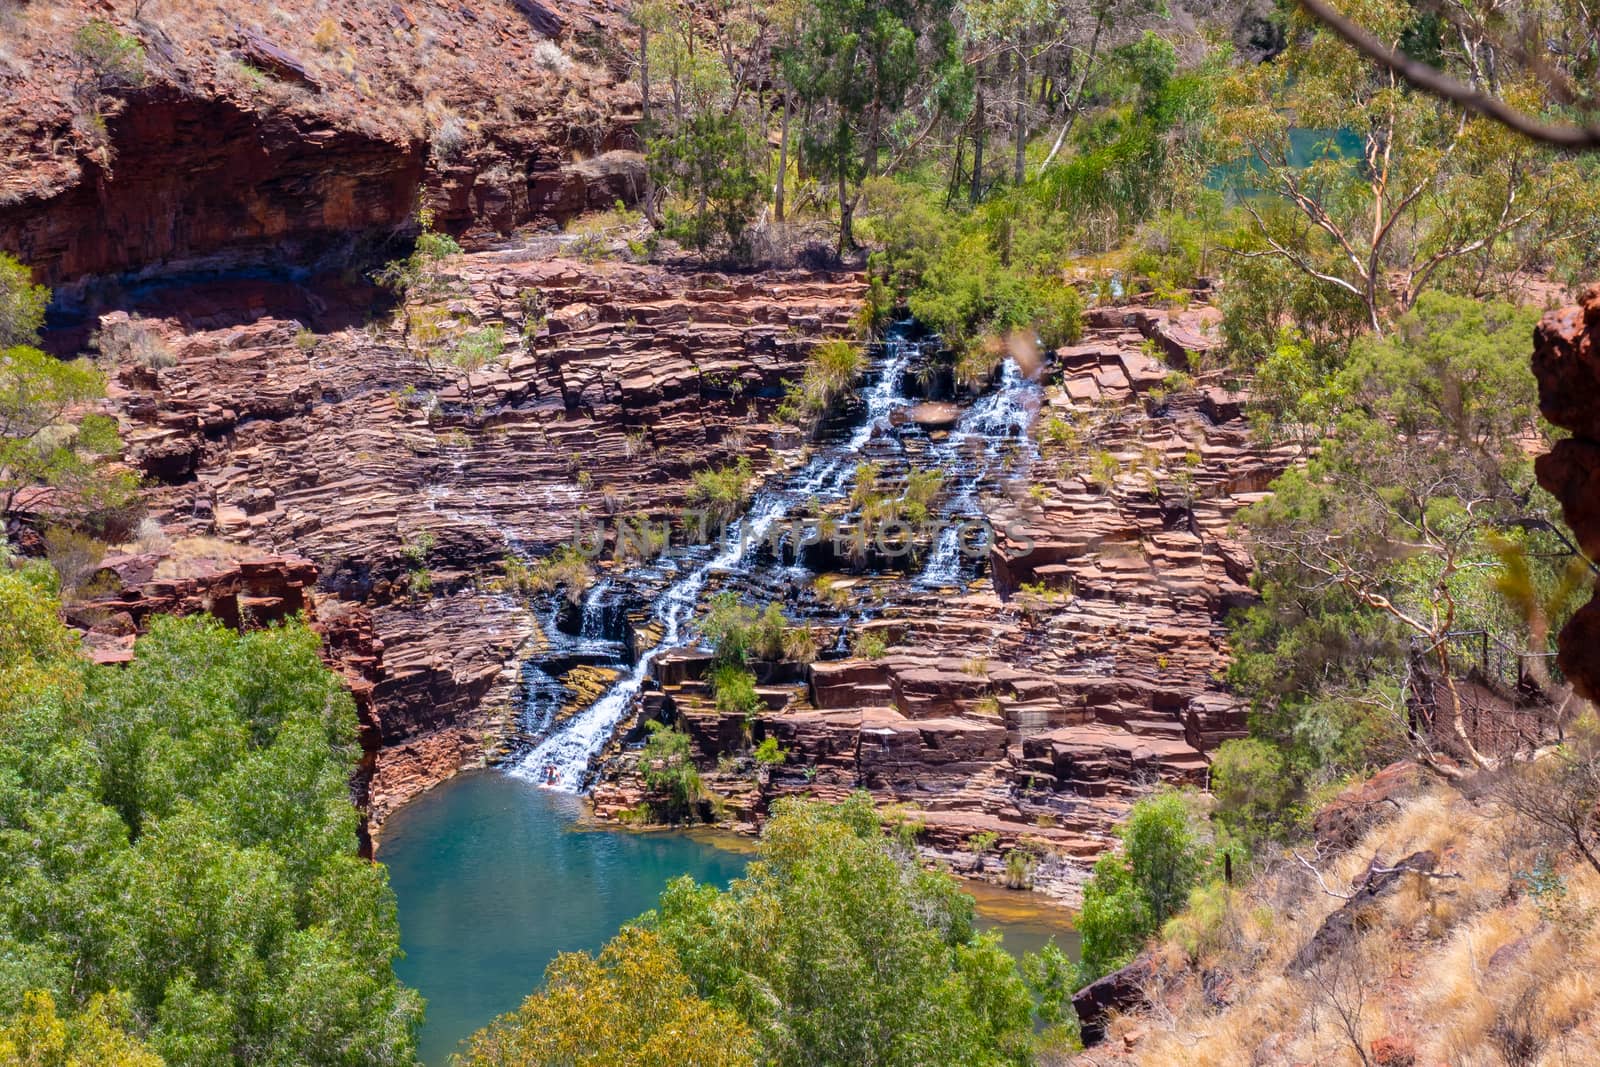 Fortescue Falls at the end of Dales Gorge at Karijni National Park Australia